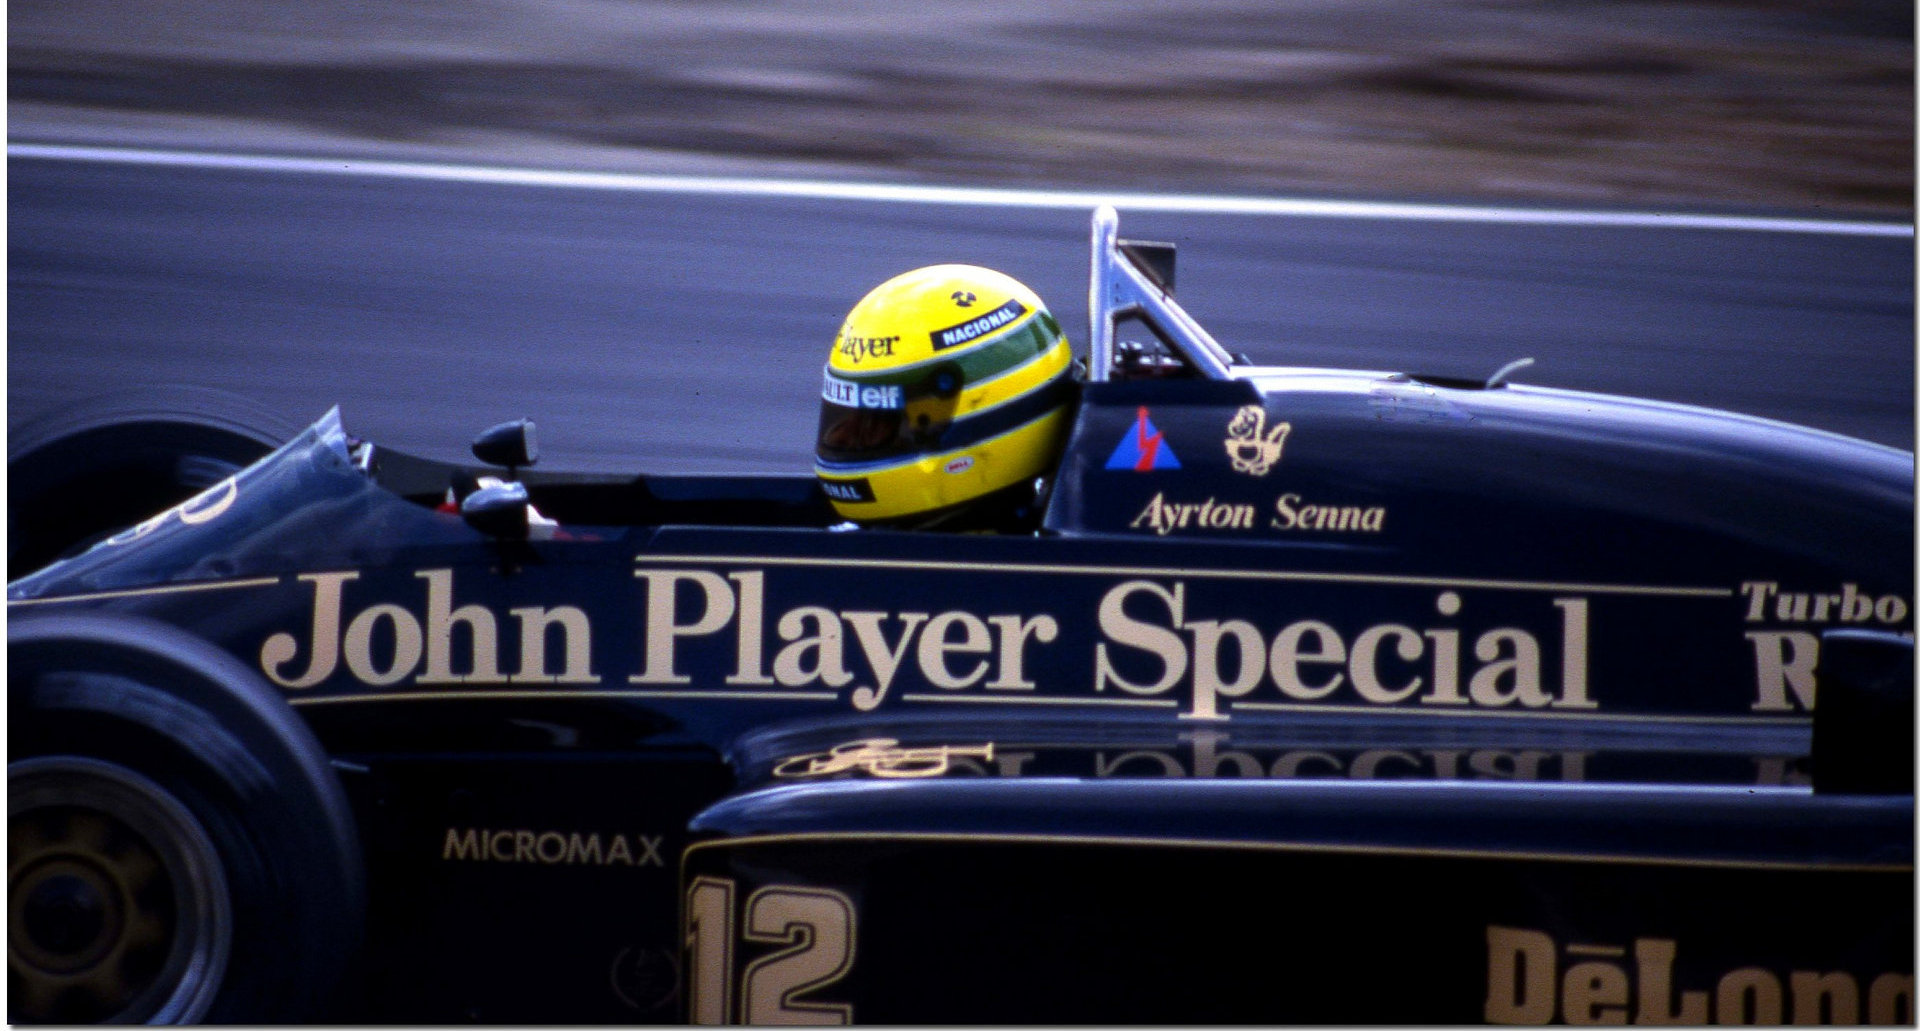 See more info about Sennas F1 career on our Ayrton Senna information